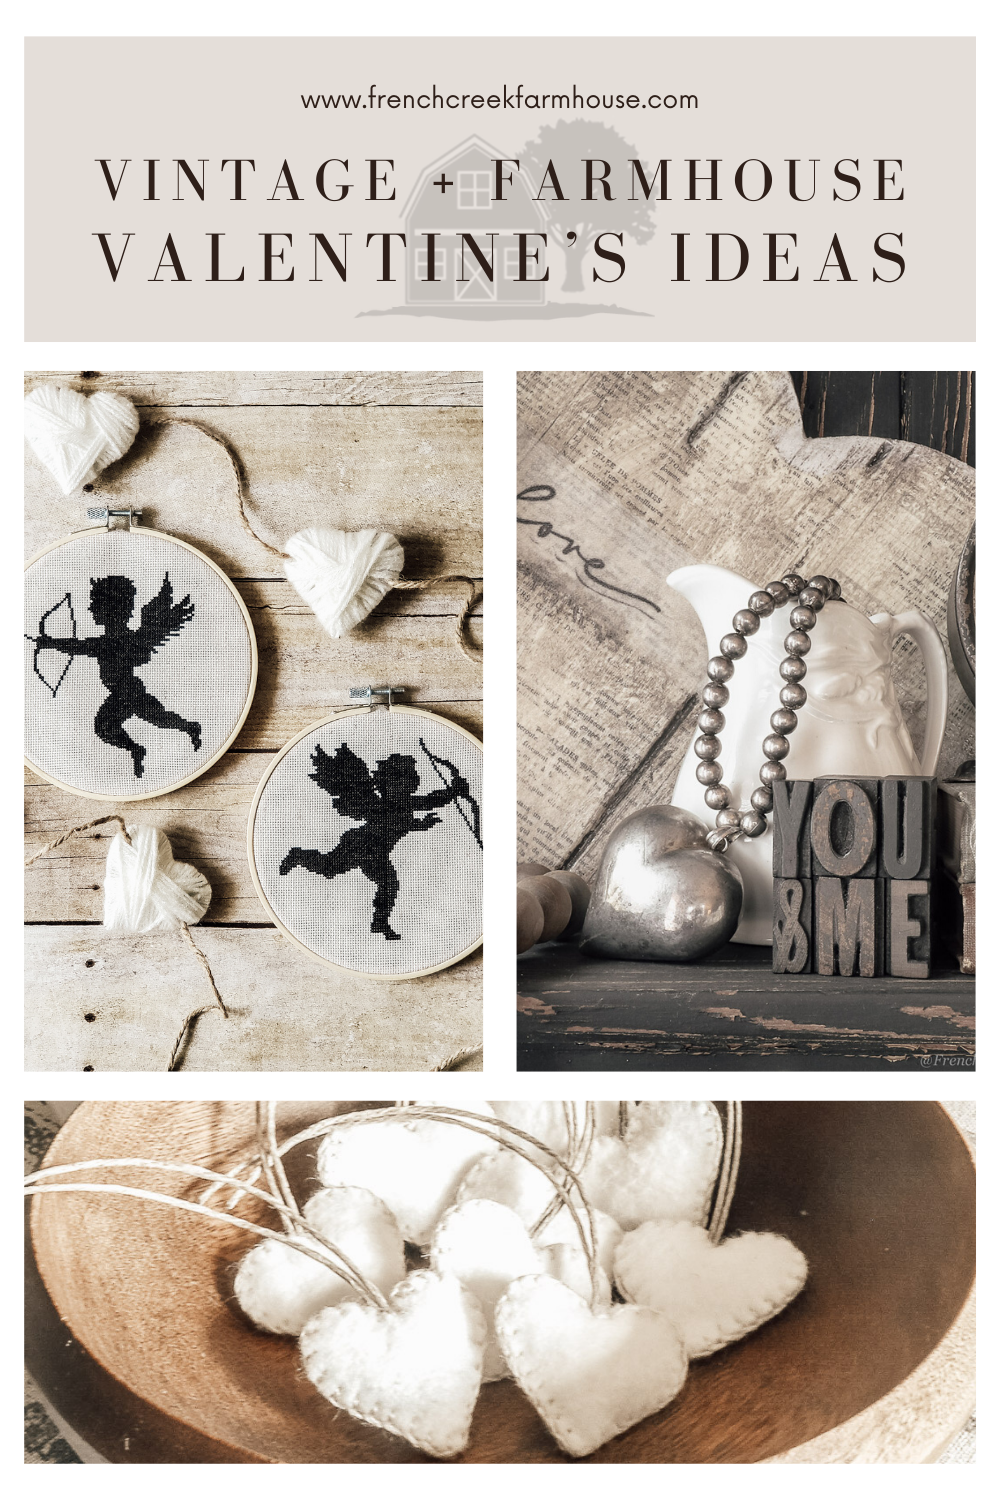 10 Incredible ideas for celebrating Valentine's Day with vintage + farmhouse charm